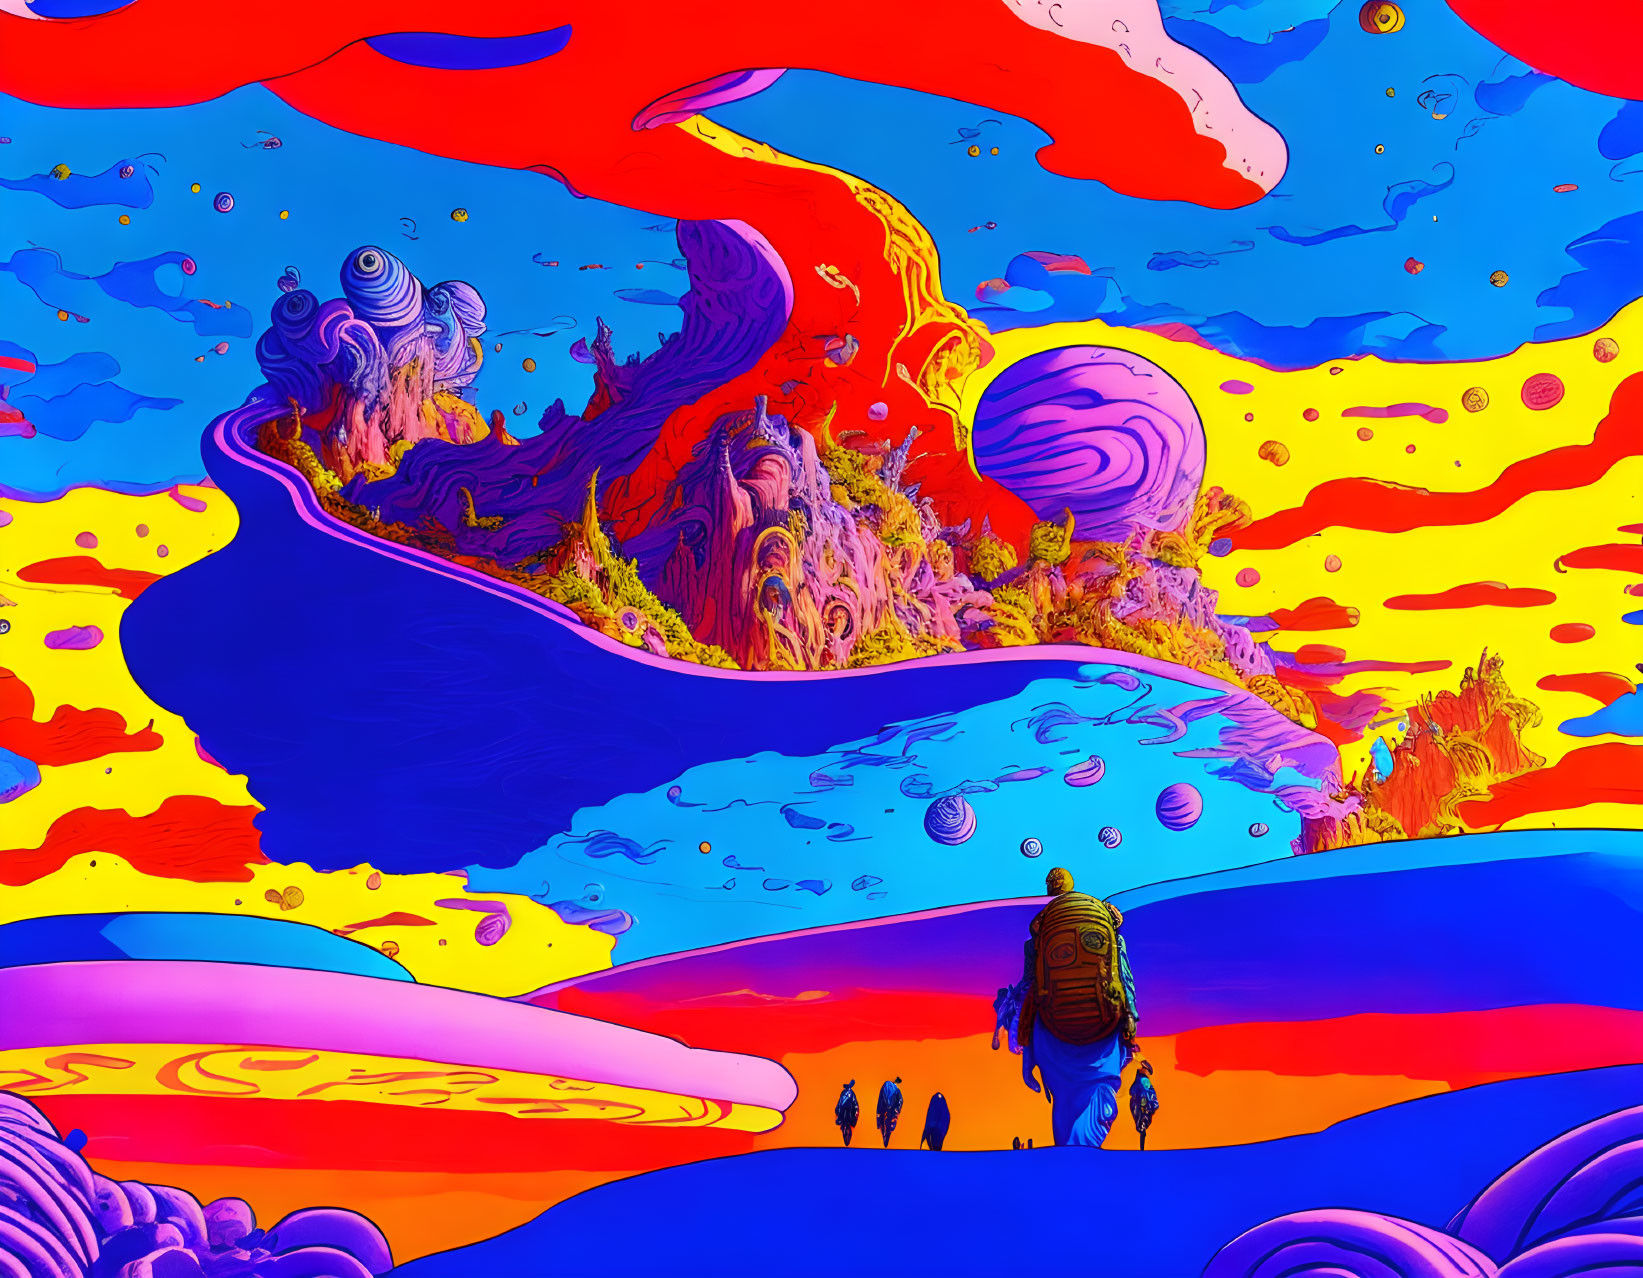 Colorful Abstract Landscape with Psychedelic Shapes and Figures in Bold Sky